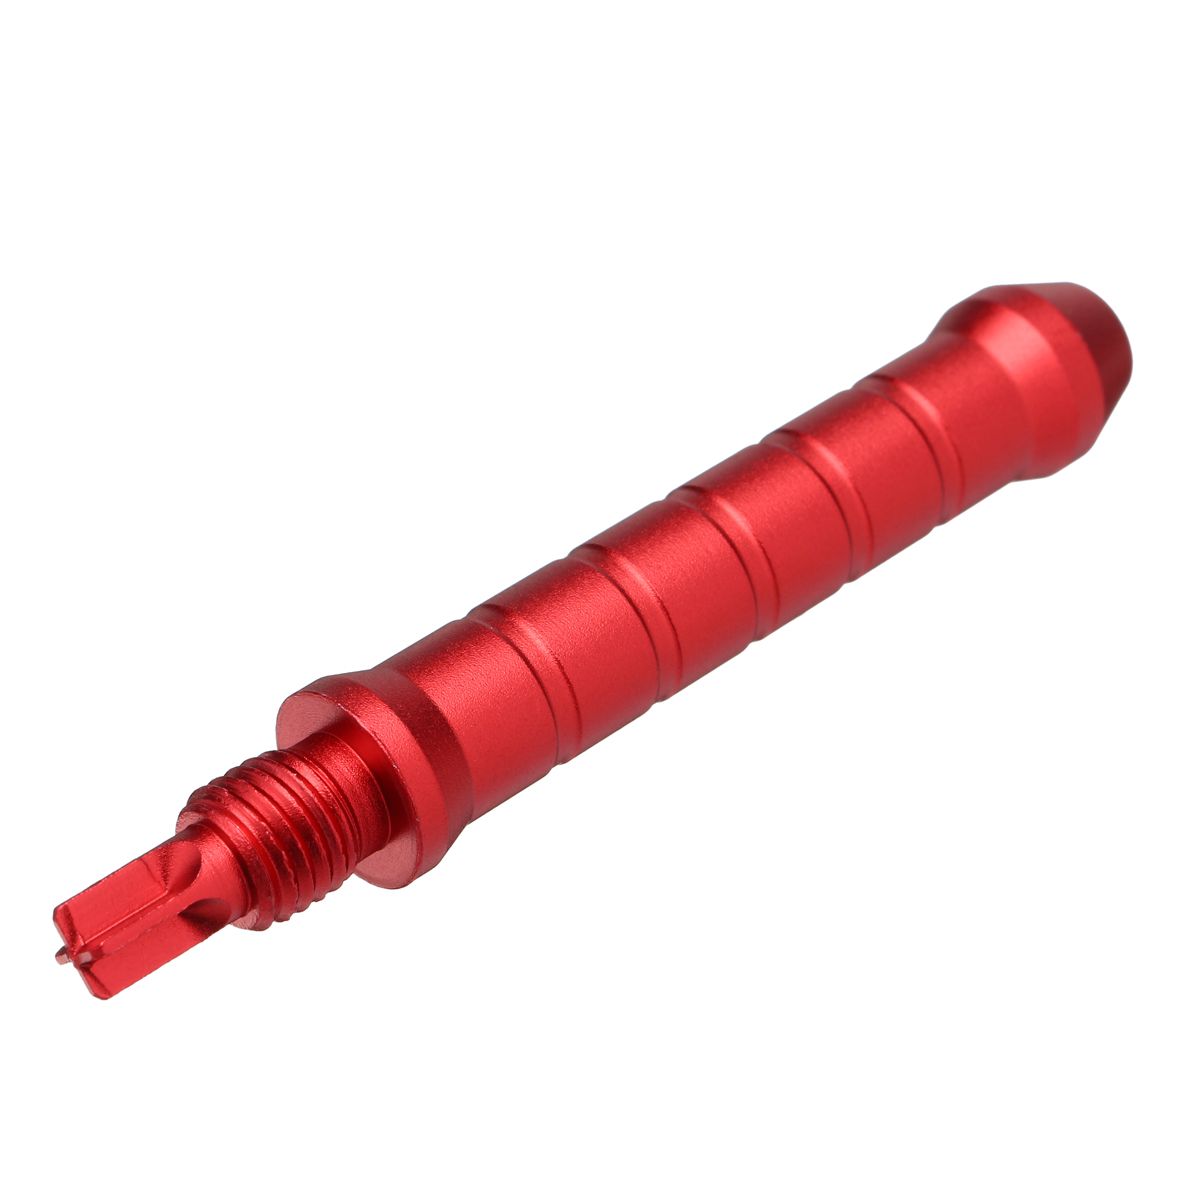 Red-Aluminium-Alloy-Keycap-Puller-Multi-functional-Keyboard-Key-Cap-Remover-Adjuster-For-Mechanical--1112261